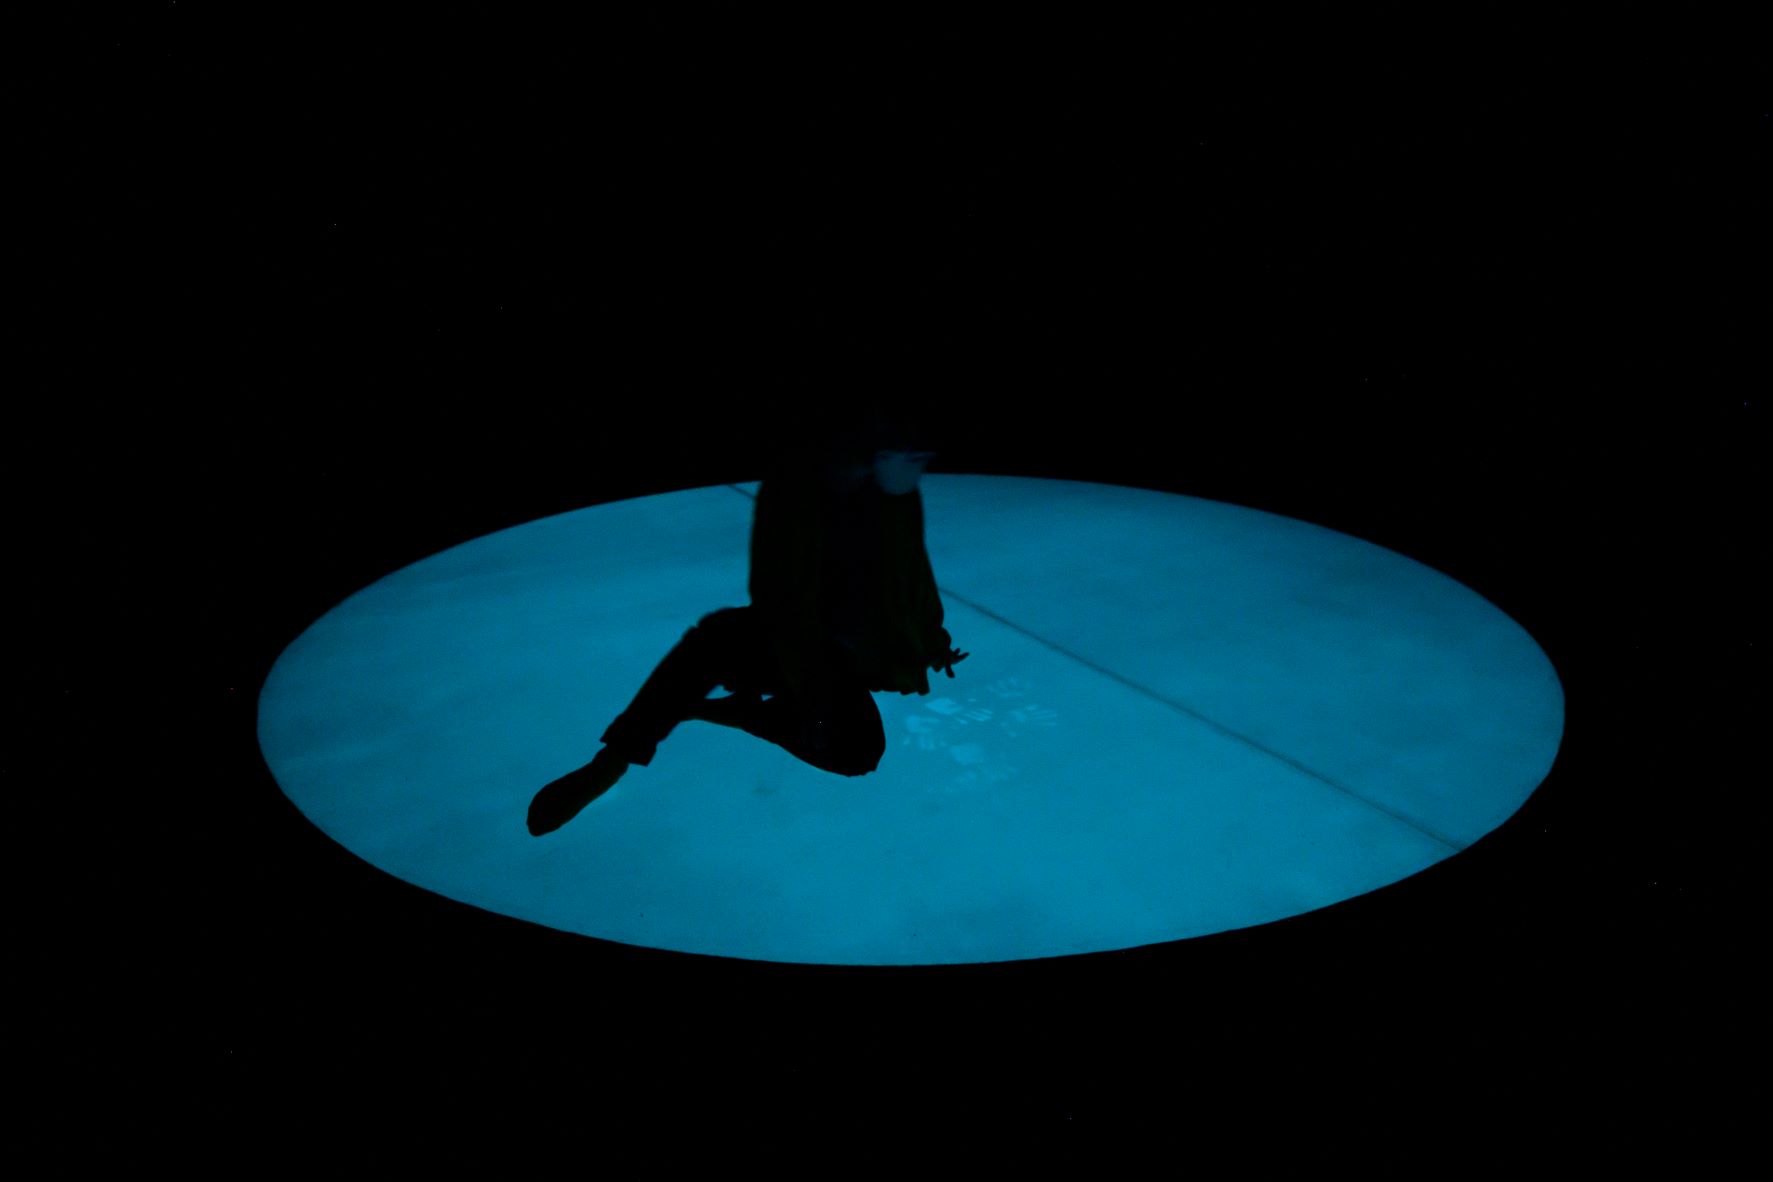 A person sits on a glowing blue circle. In front of them are handprints on the blue surface.